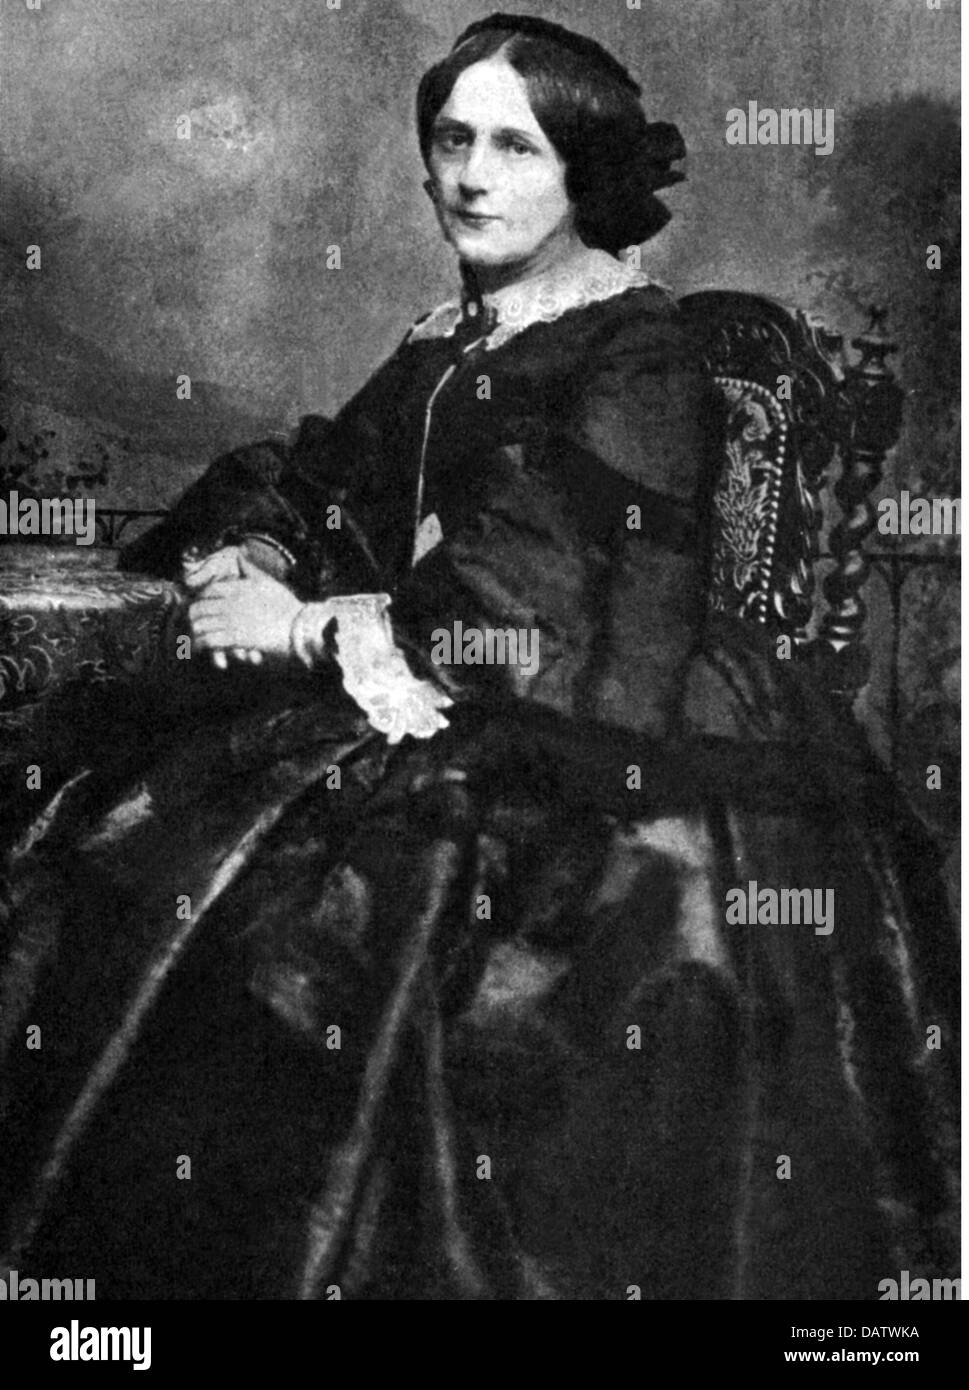 Wagner, Richard, 22.5.1813 - 13.2.1883, German musician (composer), his first wife Minna Planer (1809 - 1866), sitting, print based on photograph, circa 1850, Stock Photo